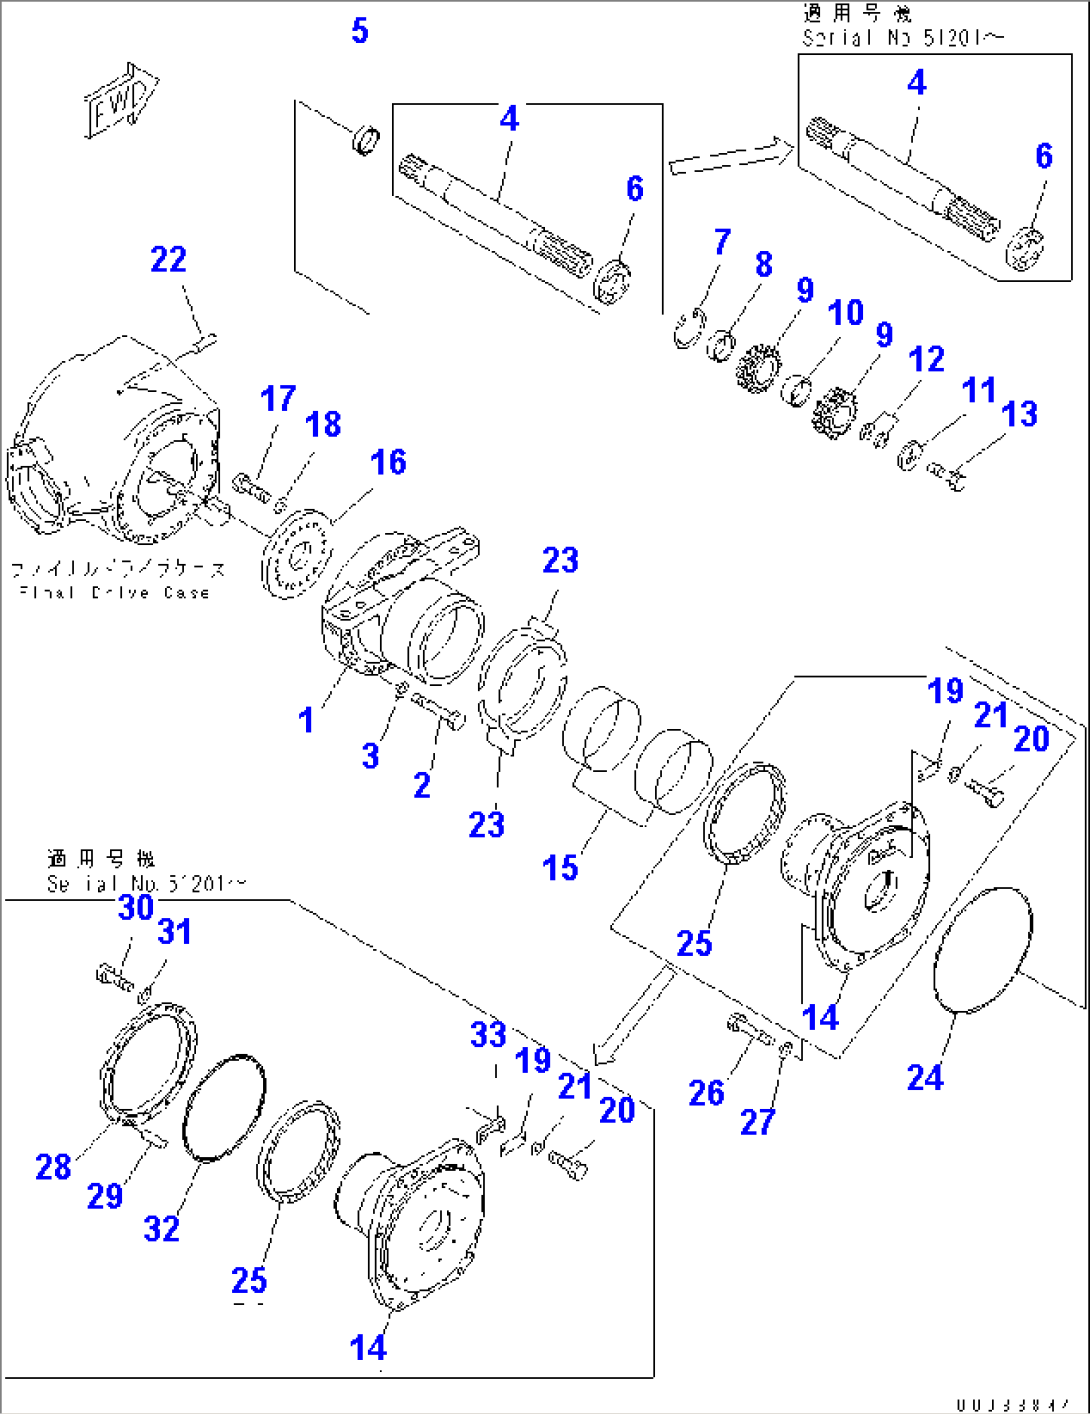 REAR AXLE (FINAL DRIVE) (TORQUE SHAFT) (NO SPIN DIFFERENTIAL)